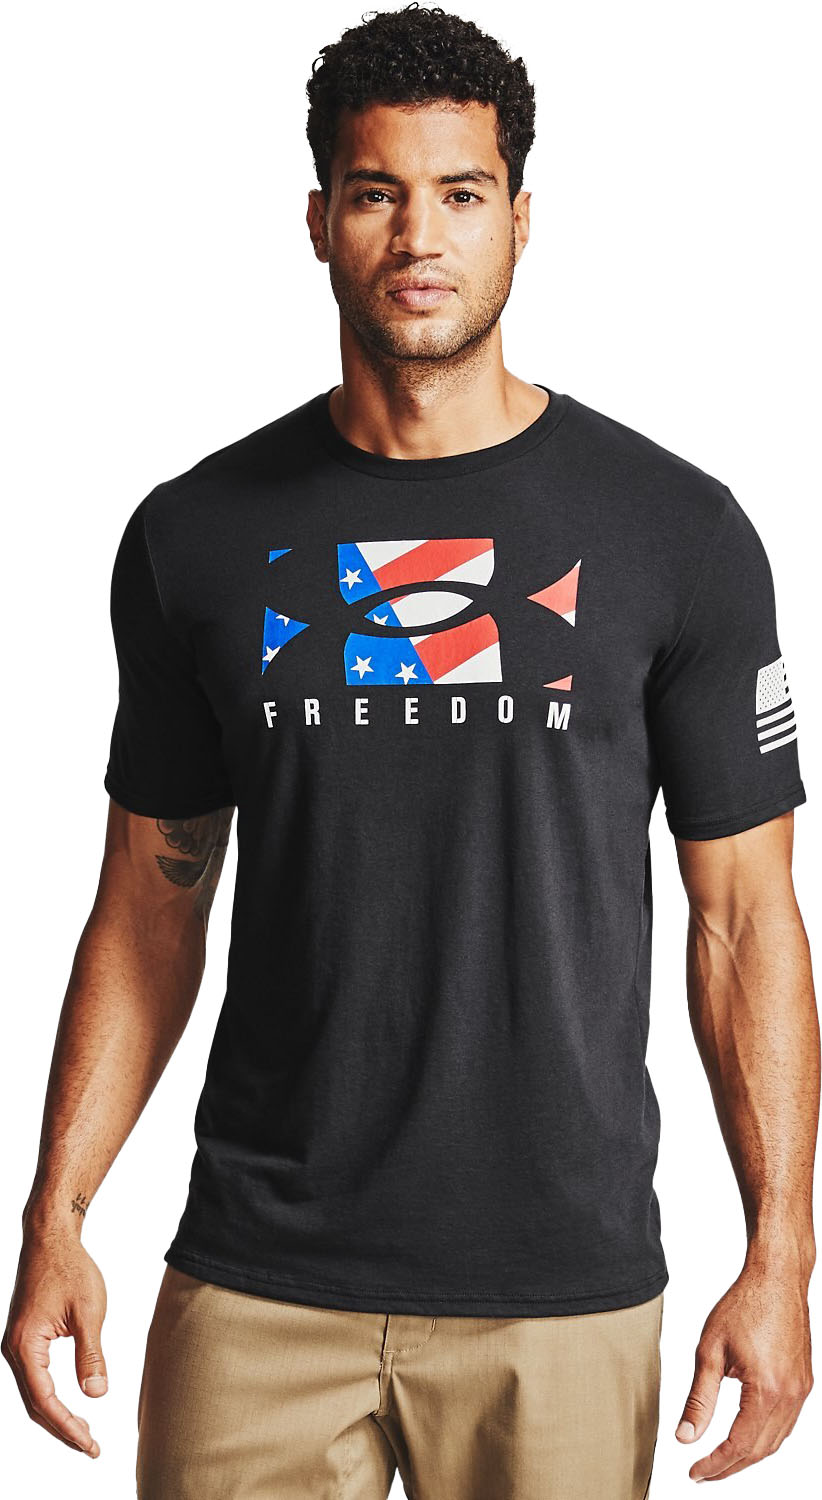 Under Armour Mens New Freedom Bfl T-Shirt 